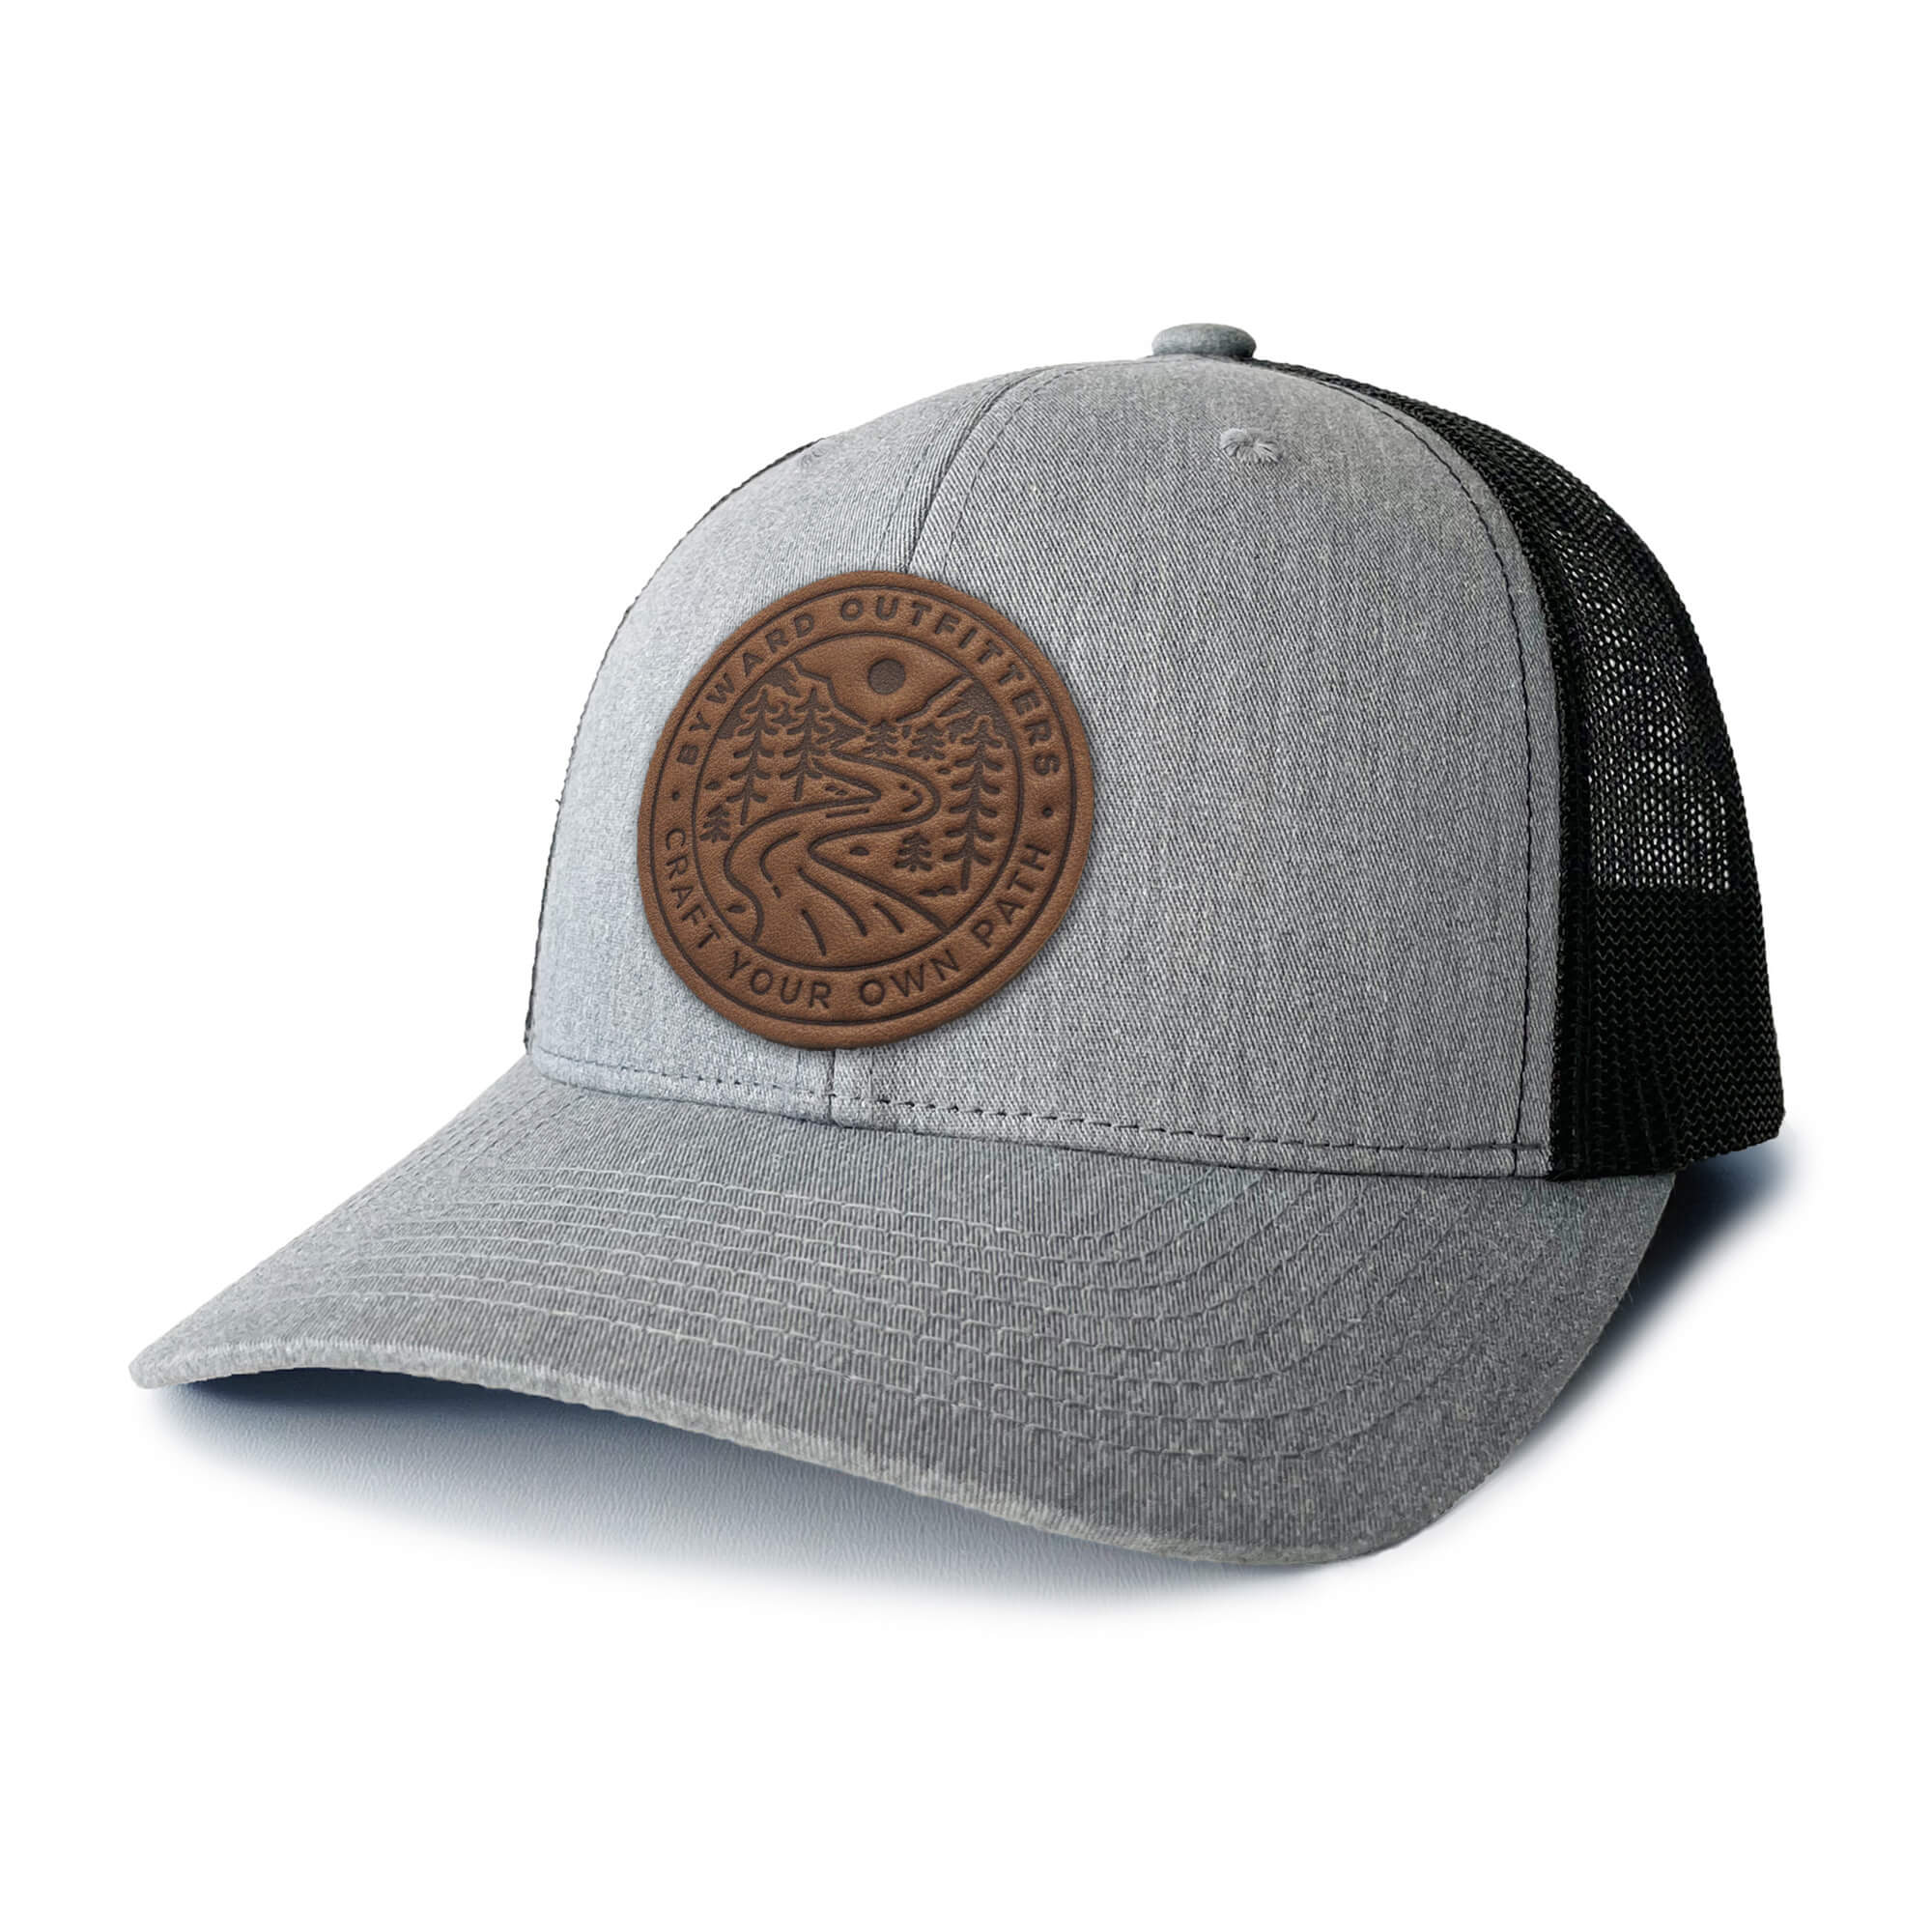 Heather Grey and white trucker hat with full-grain leather patch of Winding Wilderness | BLACK-005-004, CHARC-005-004, NAVY-005-004, HGREY-005-004, MOSS-005-004, BROWN-005-004